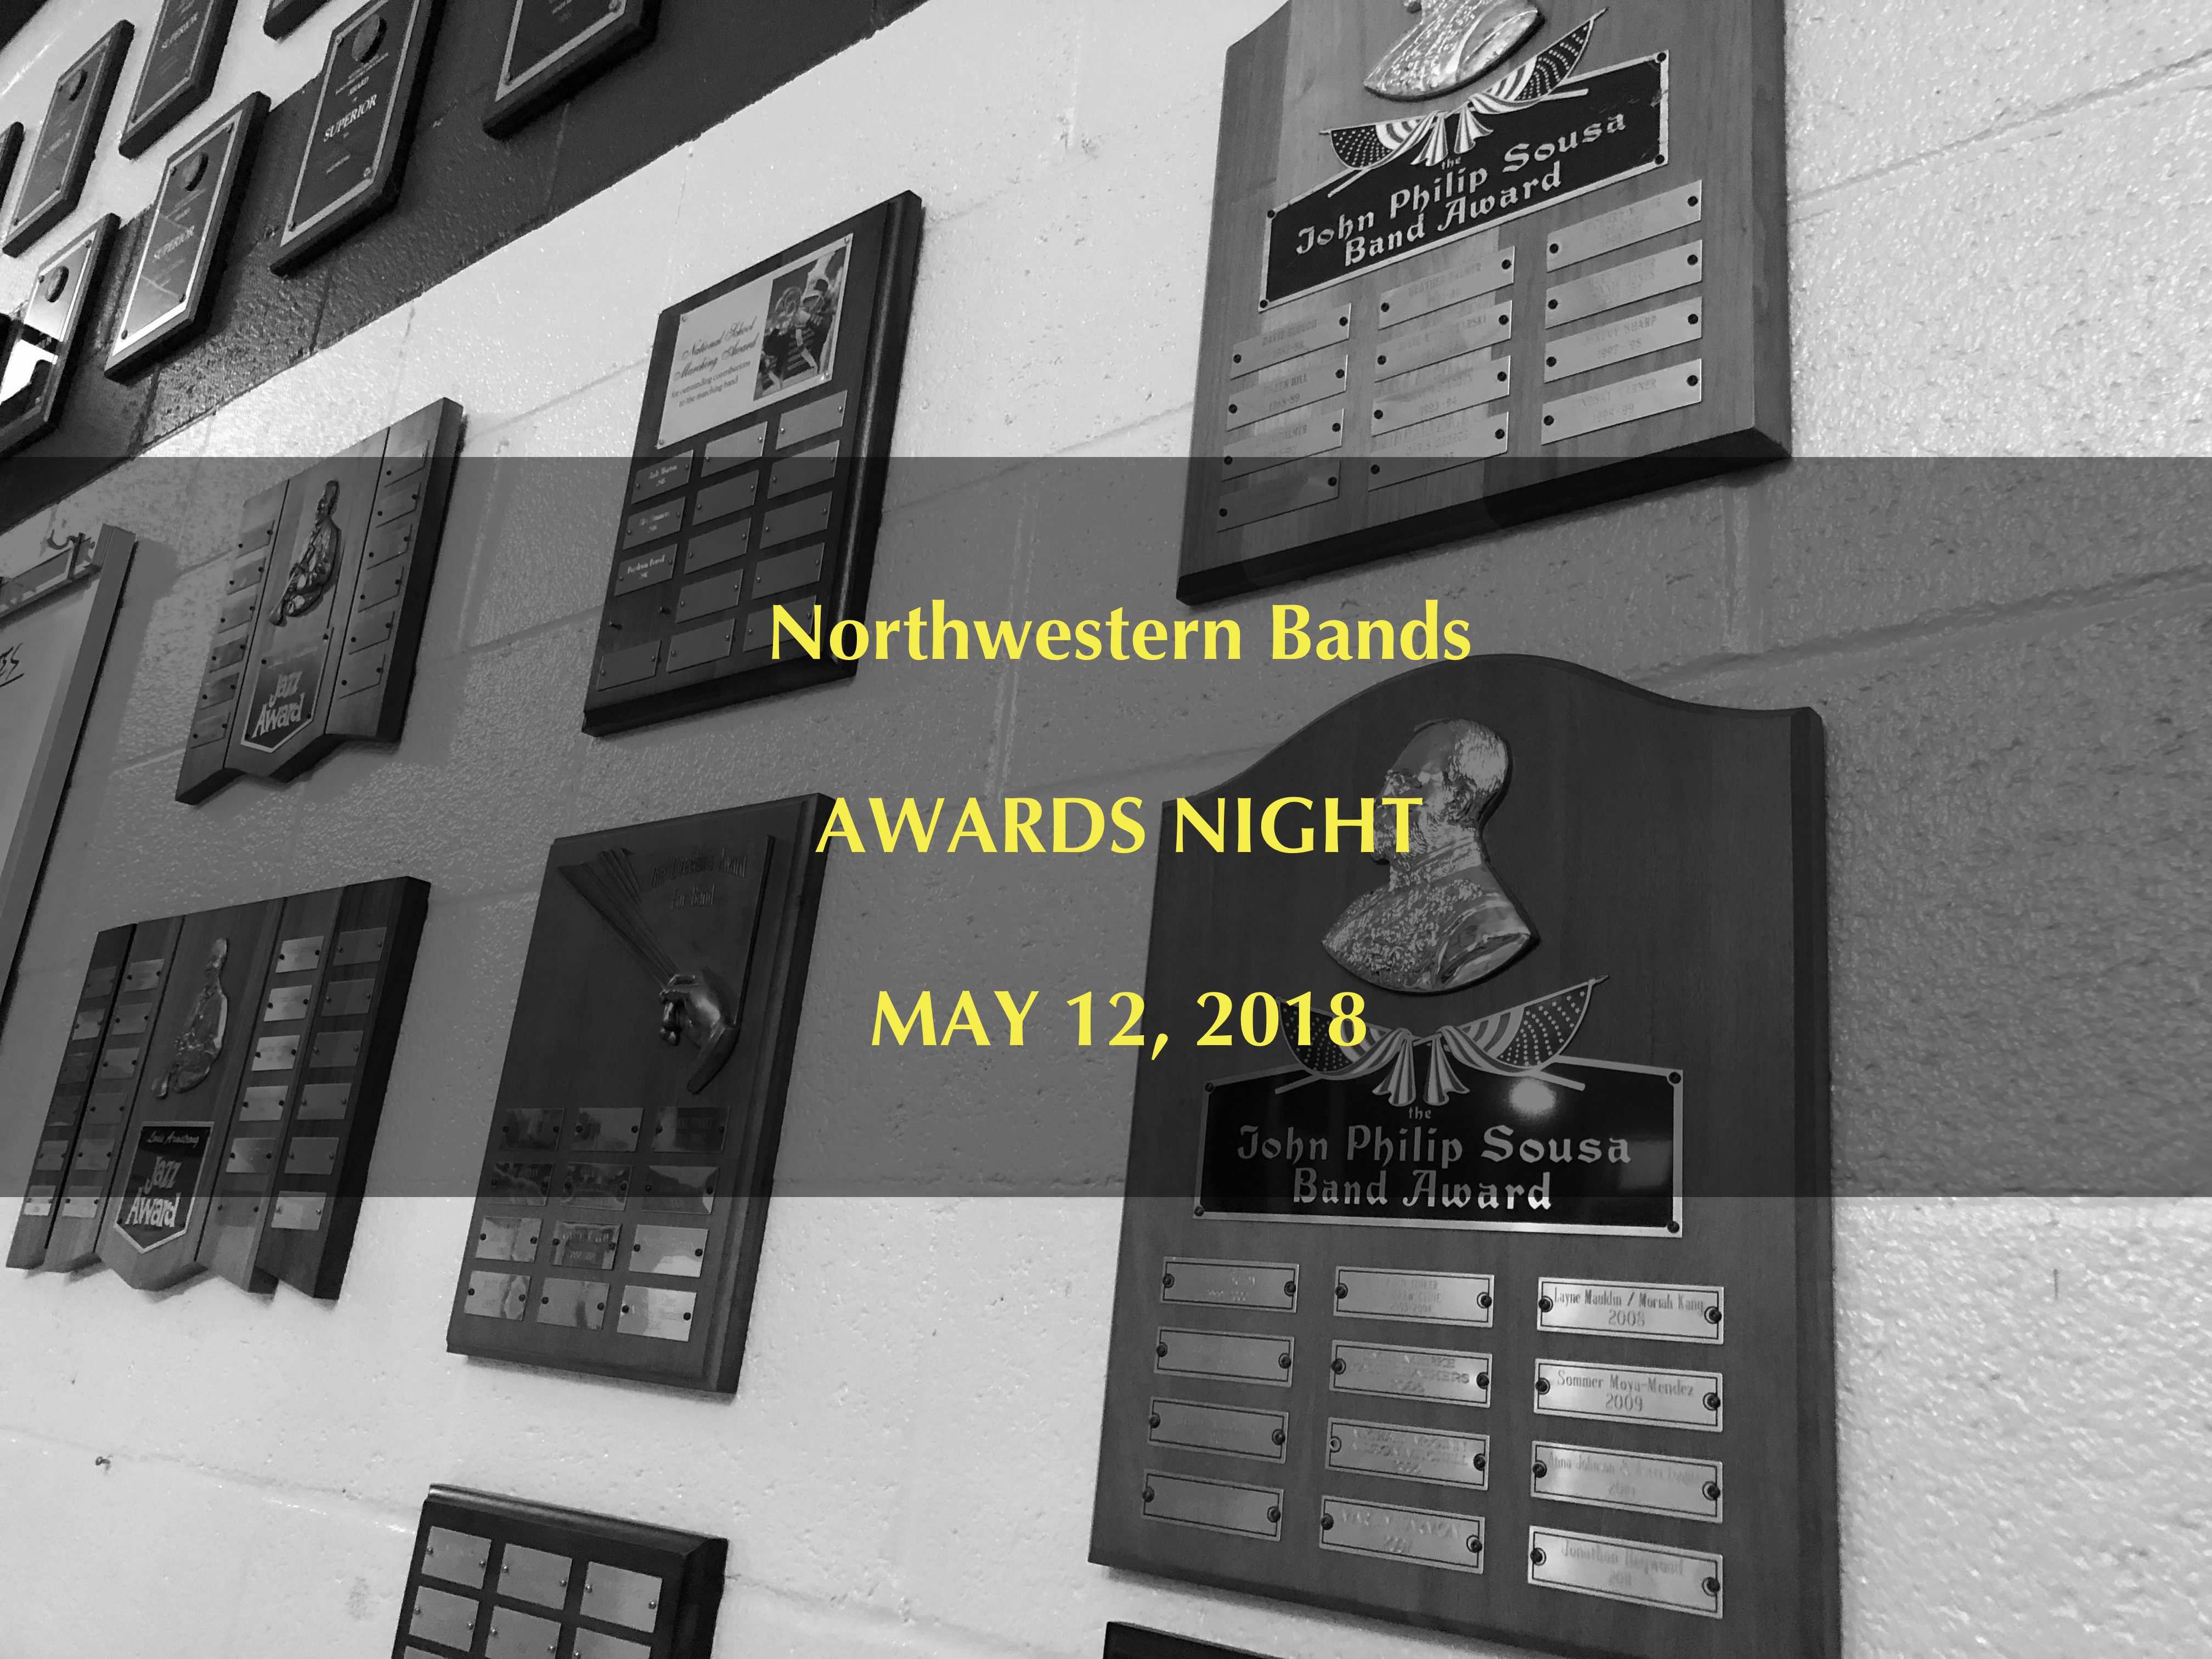 Thumbnail for the post titled: 2018 Band Awards Night